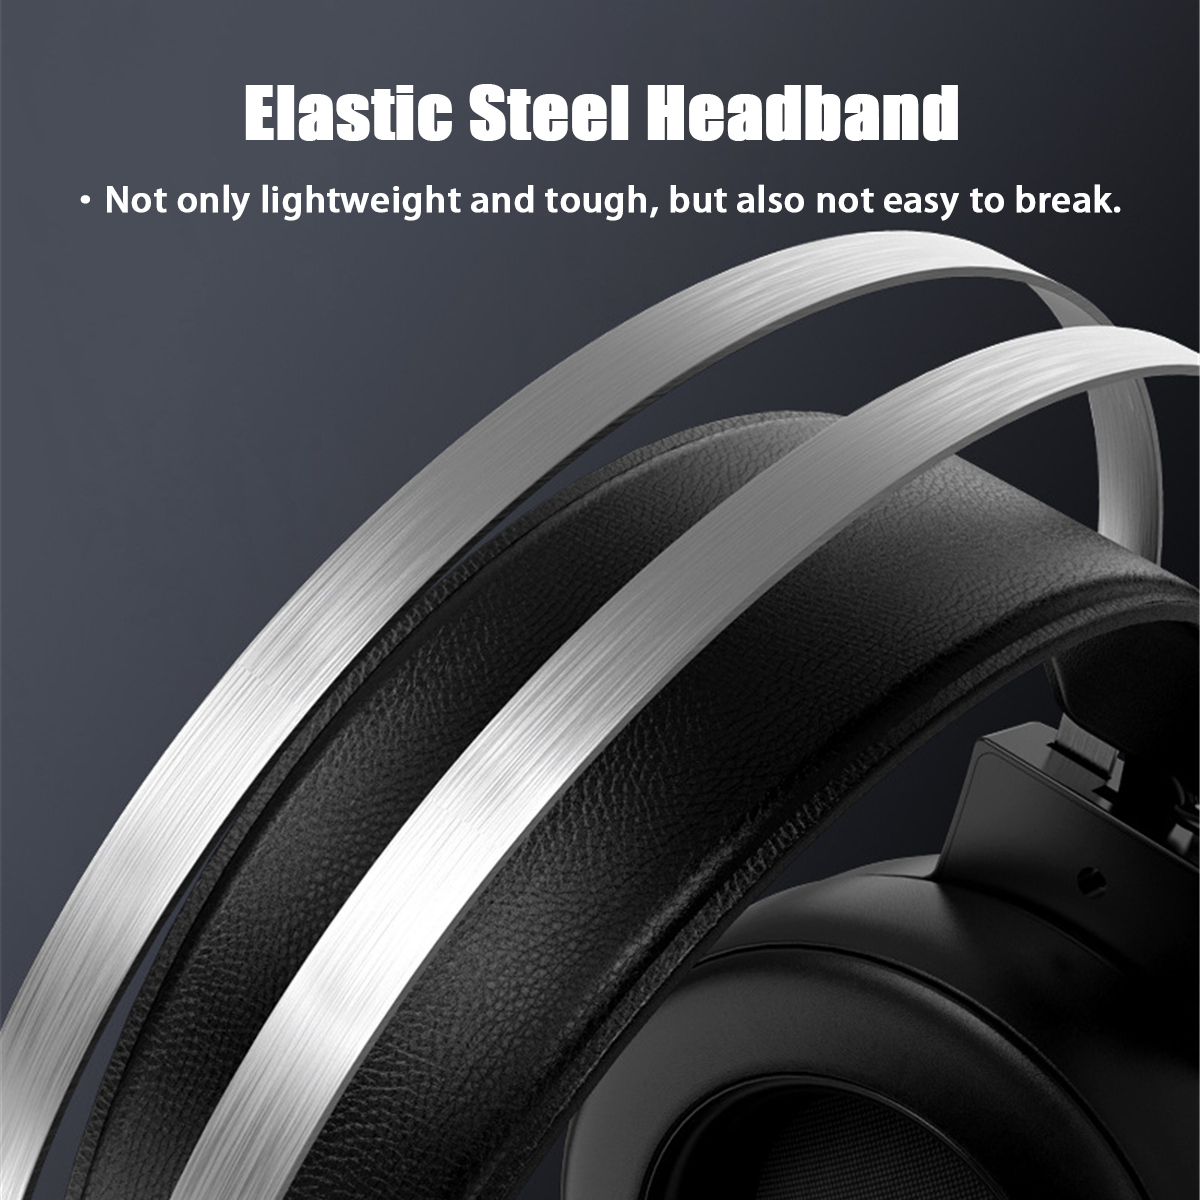 Bakeey-M10-Gaming-Headset-50mm-Drivers-Noise-Reduction-RGB-Luminous-Head-Mounted-35mm-Gaming-Headpho-1805656-8